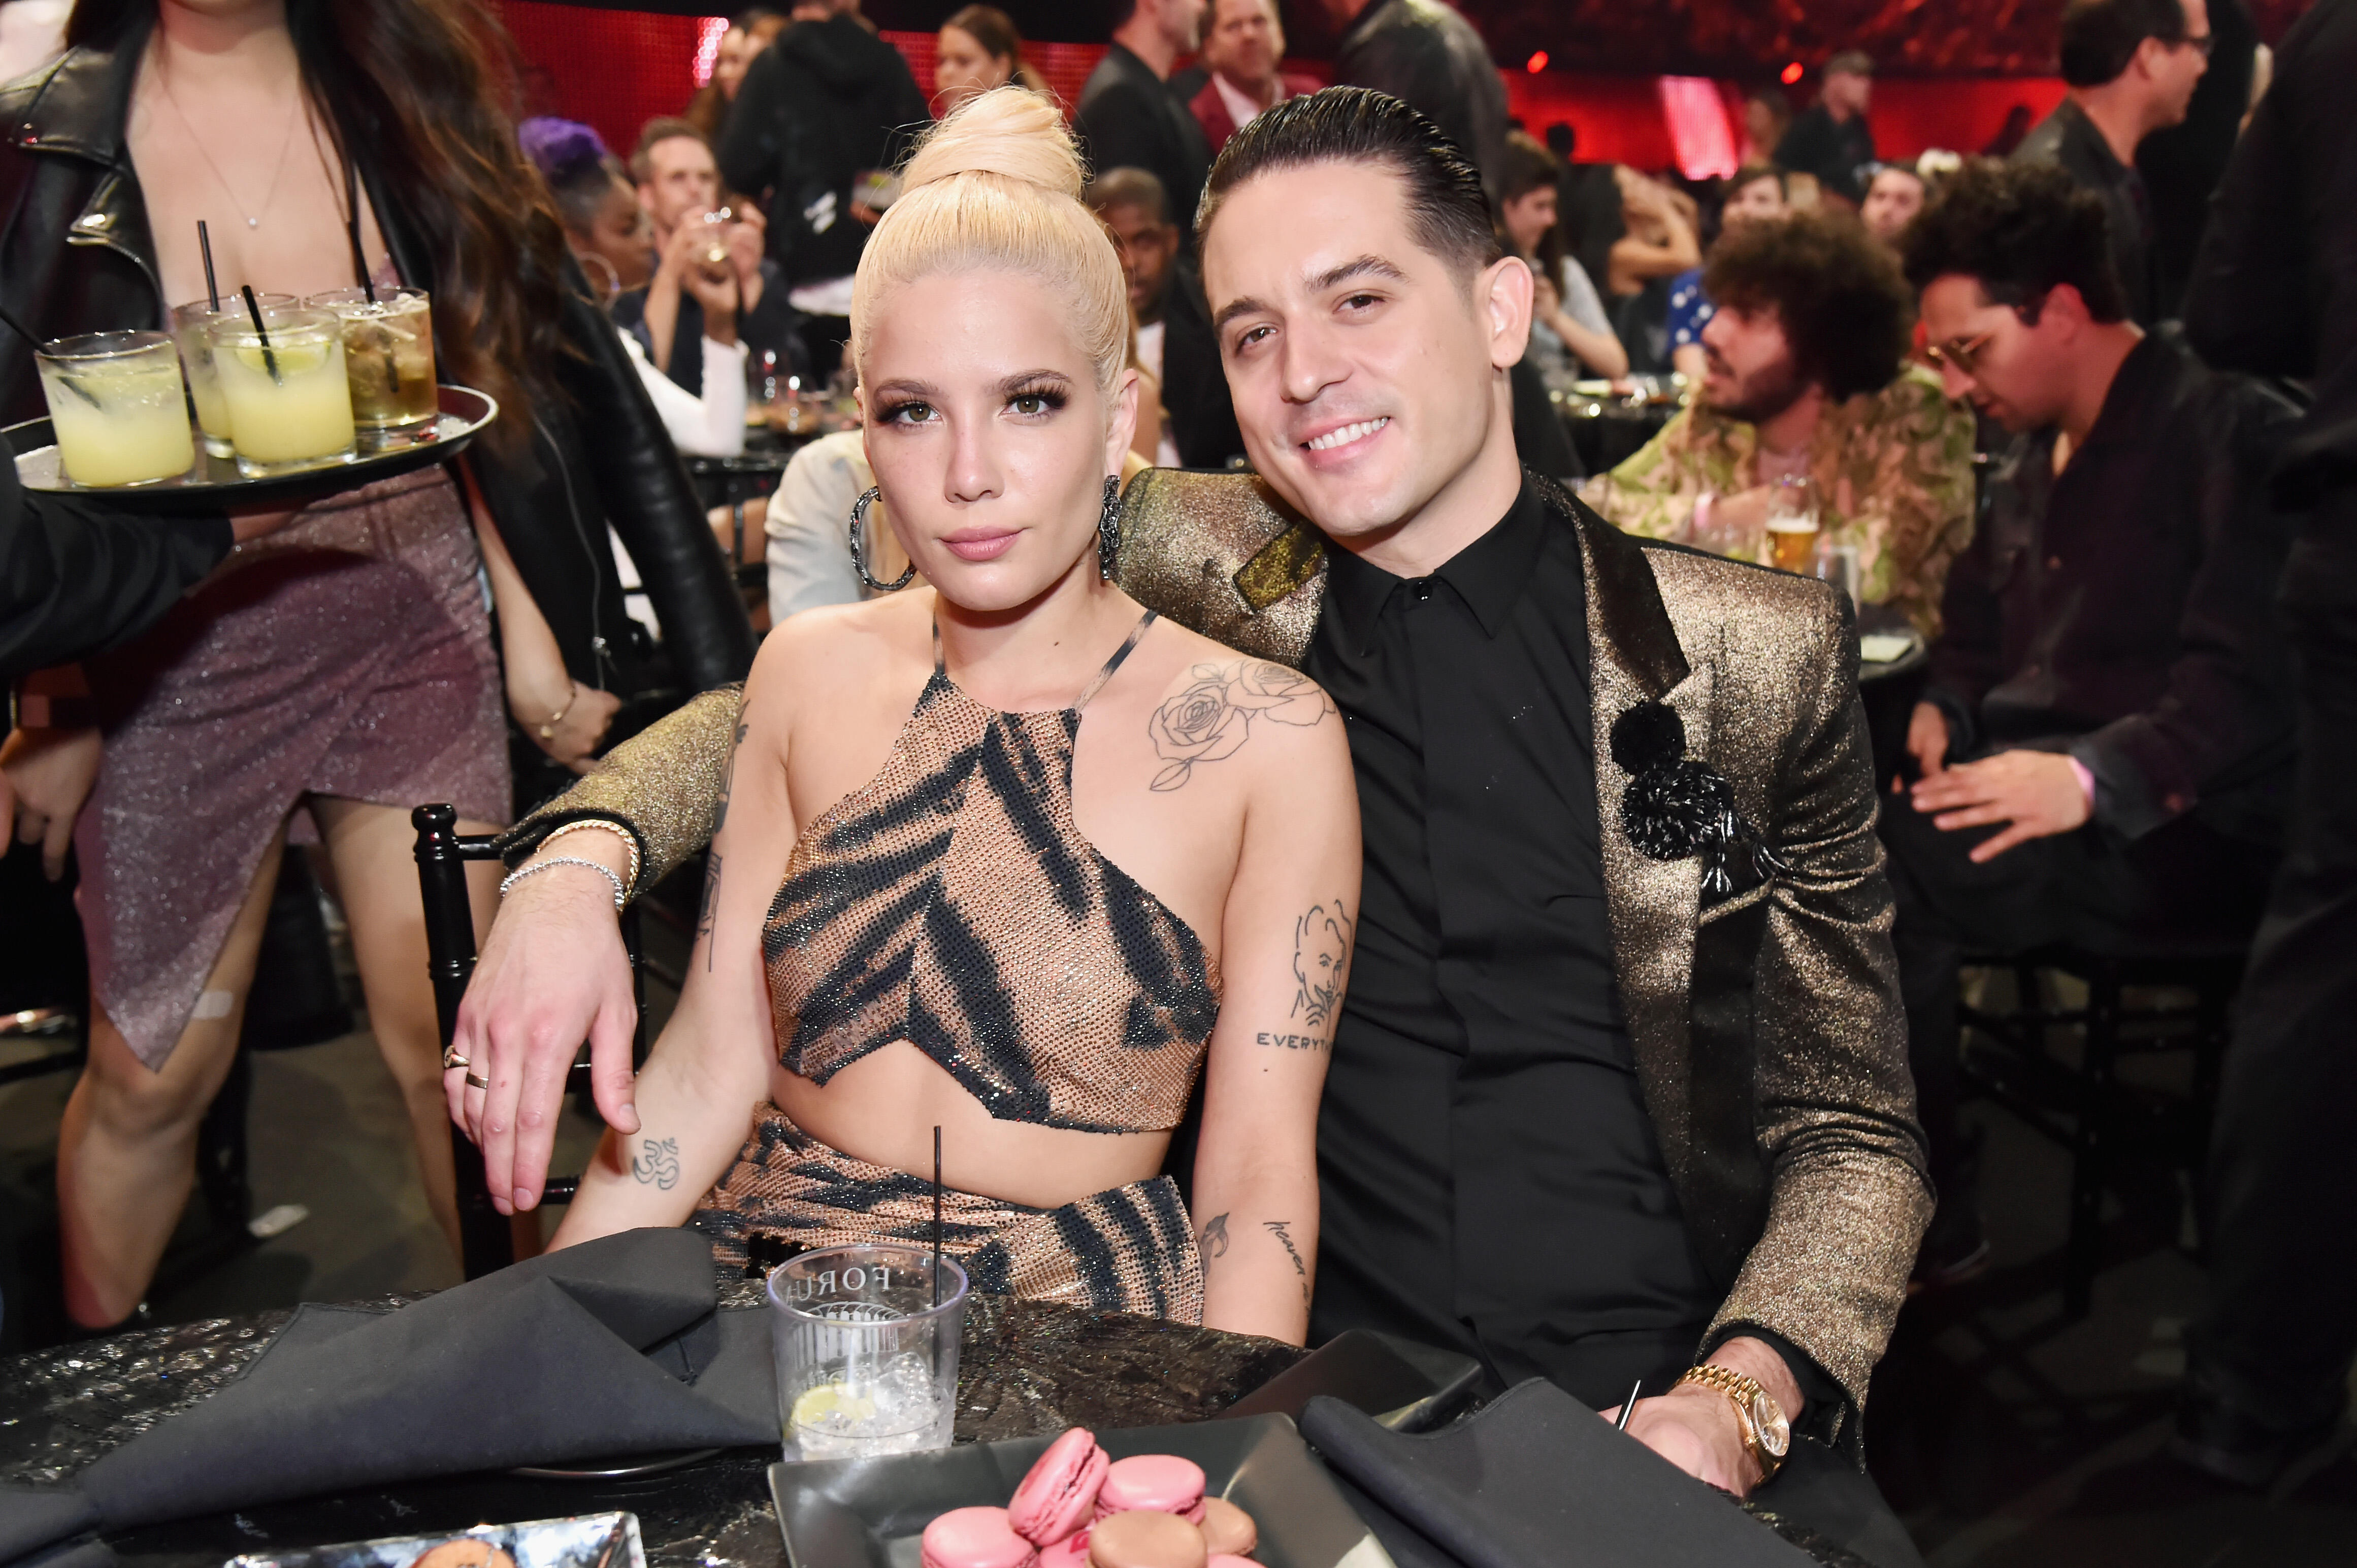 Are G-Eazy and Halsey Back Together? Inside Their VMAs Night Out | iHeartRadio